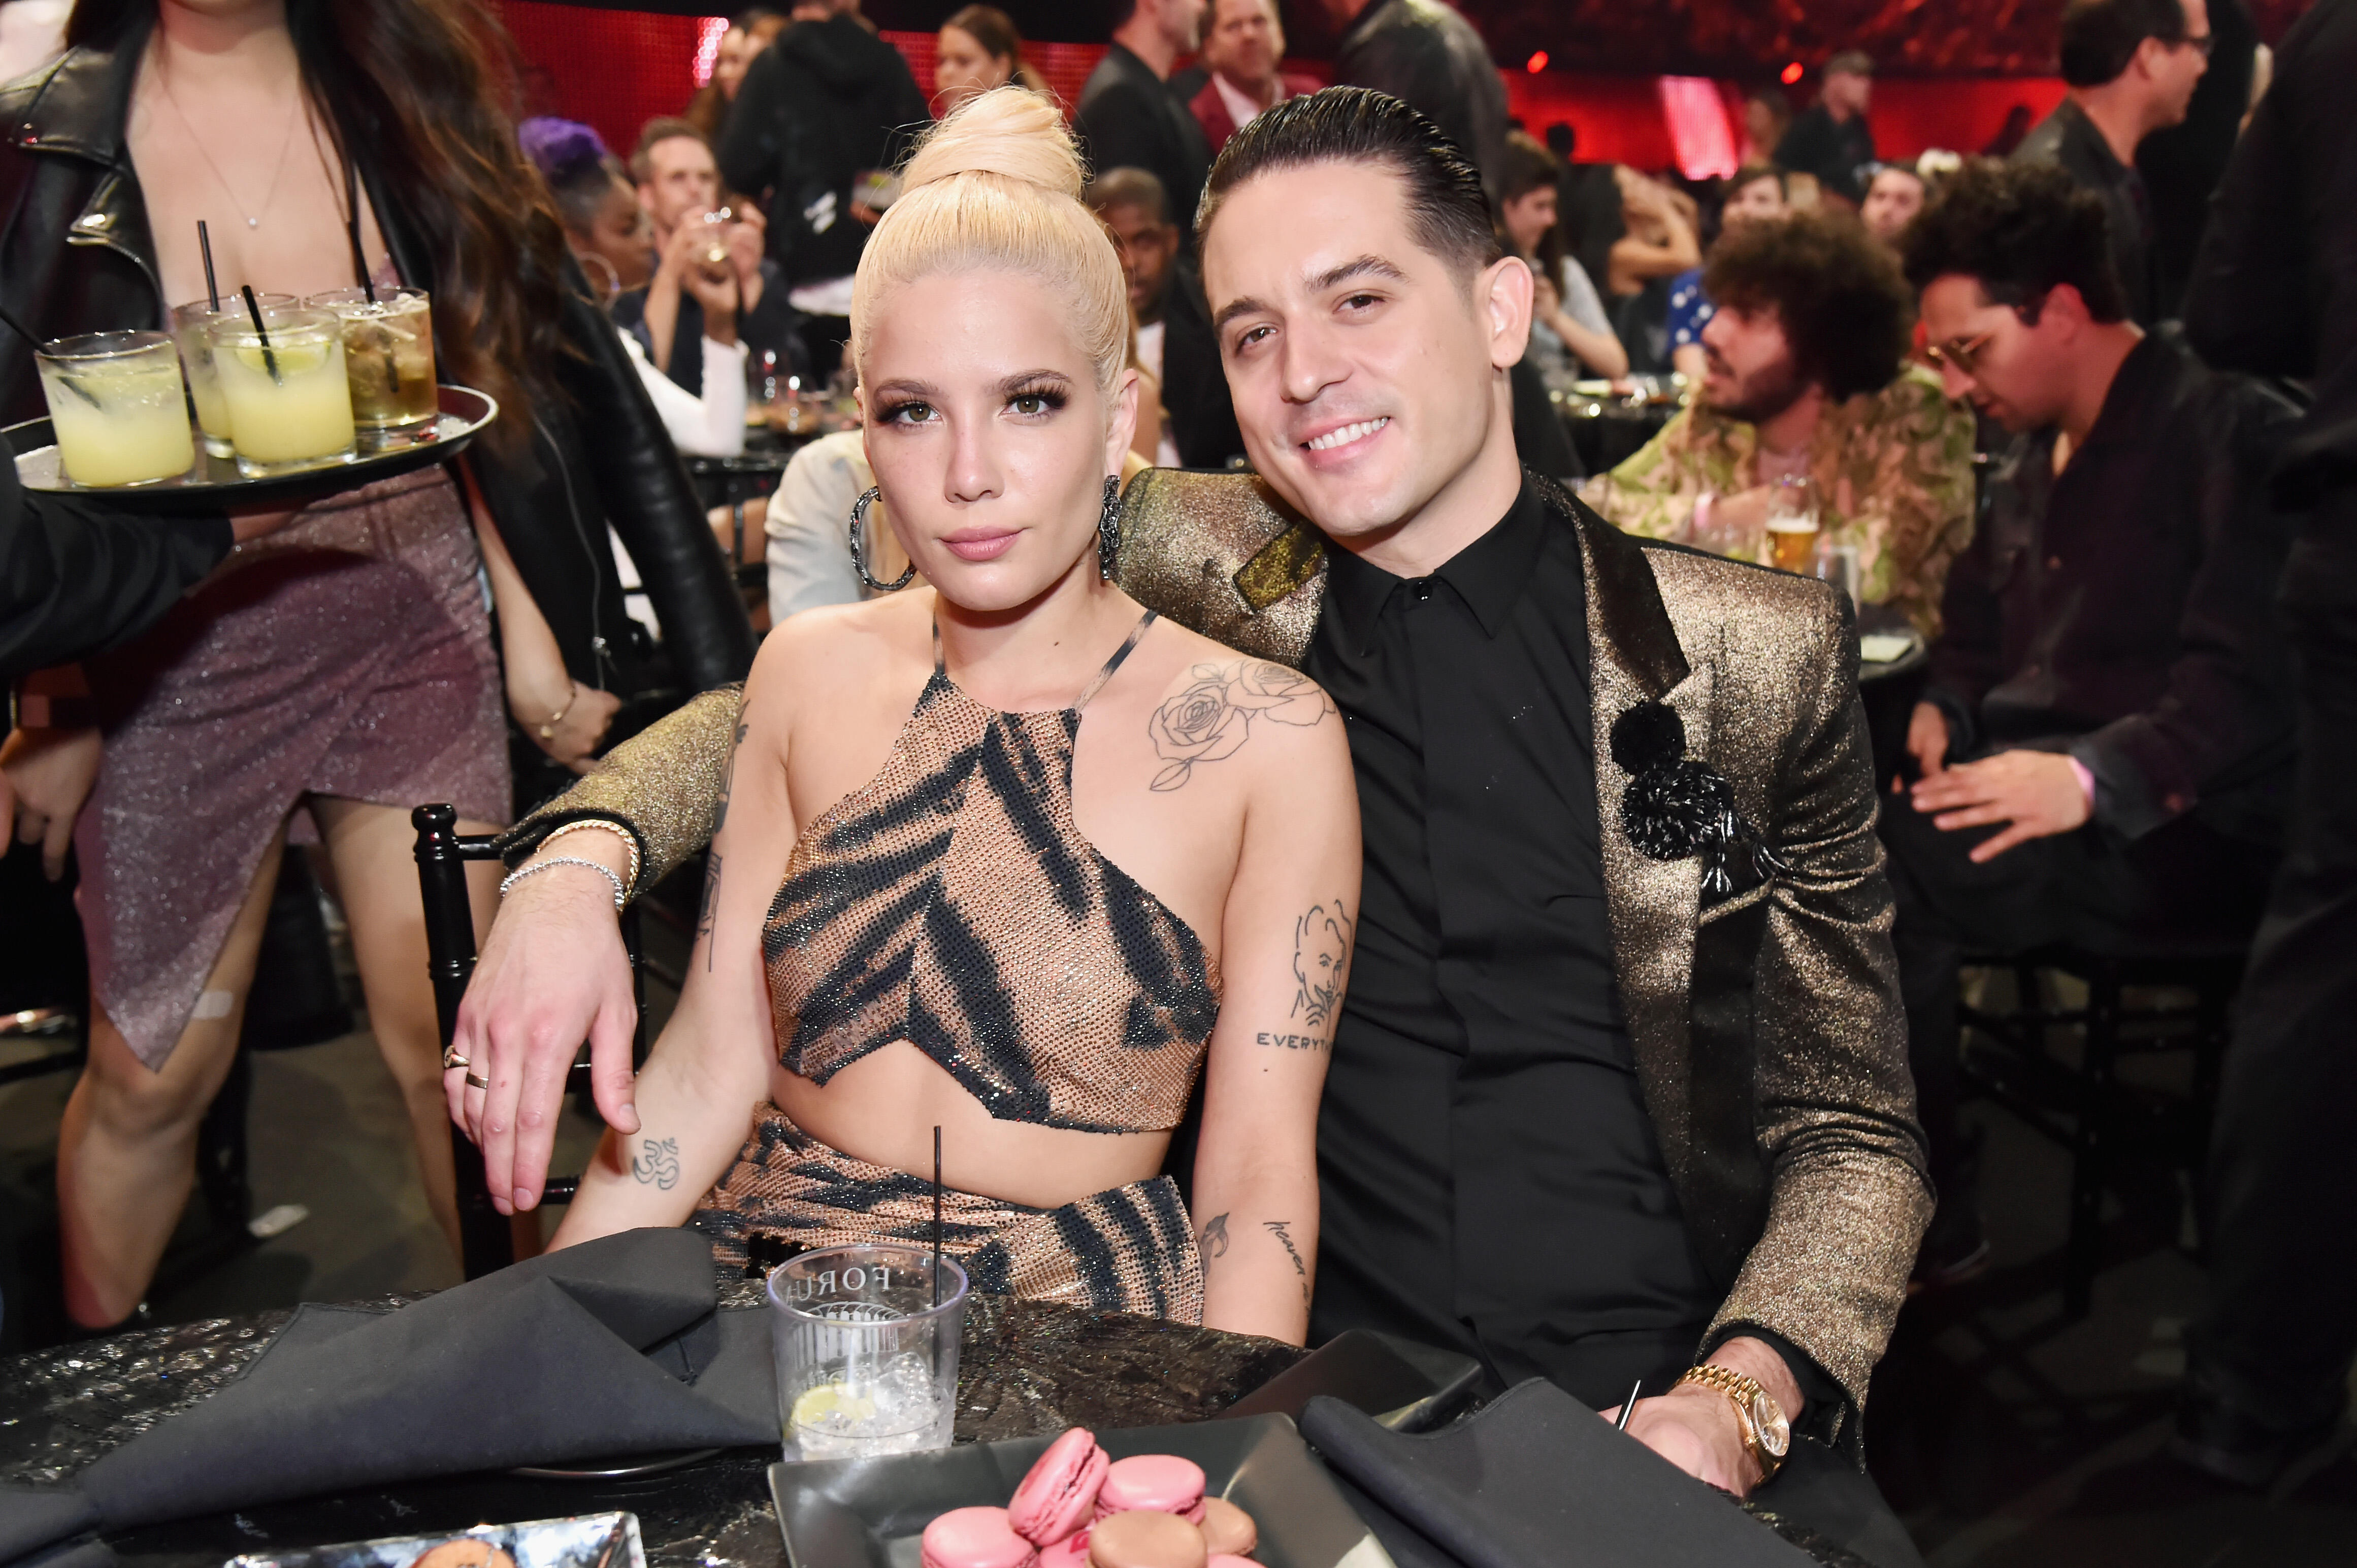 Are G-Eazy and Halsey Back Together? Inside Their VMAs Night Out | iHeartRadio